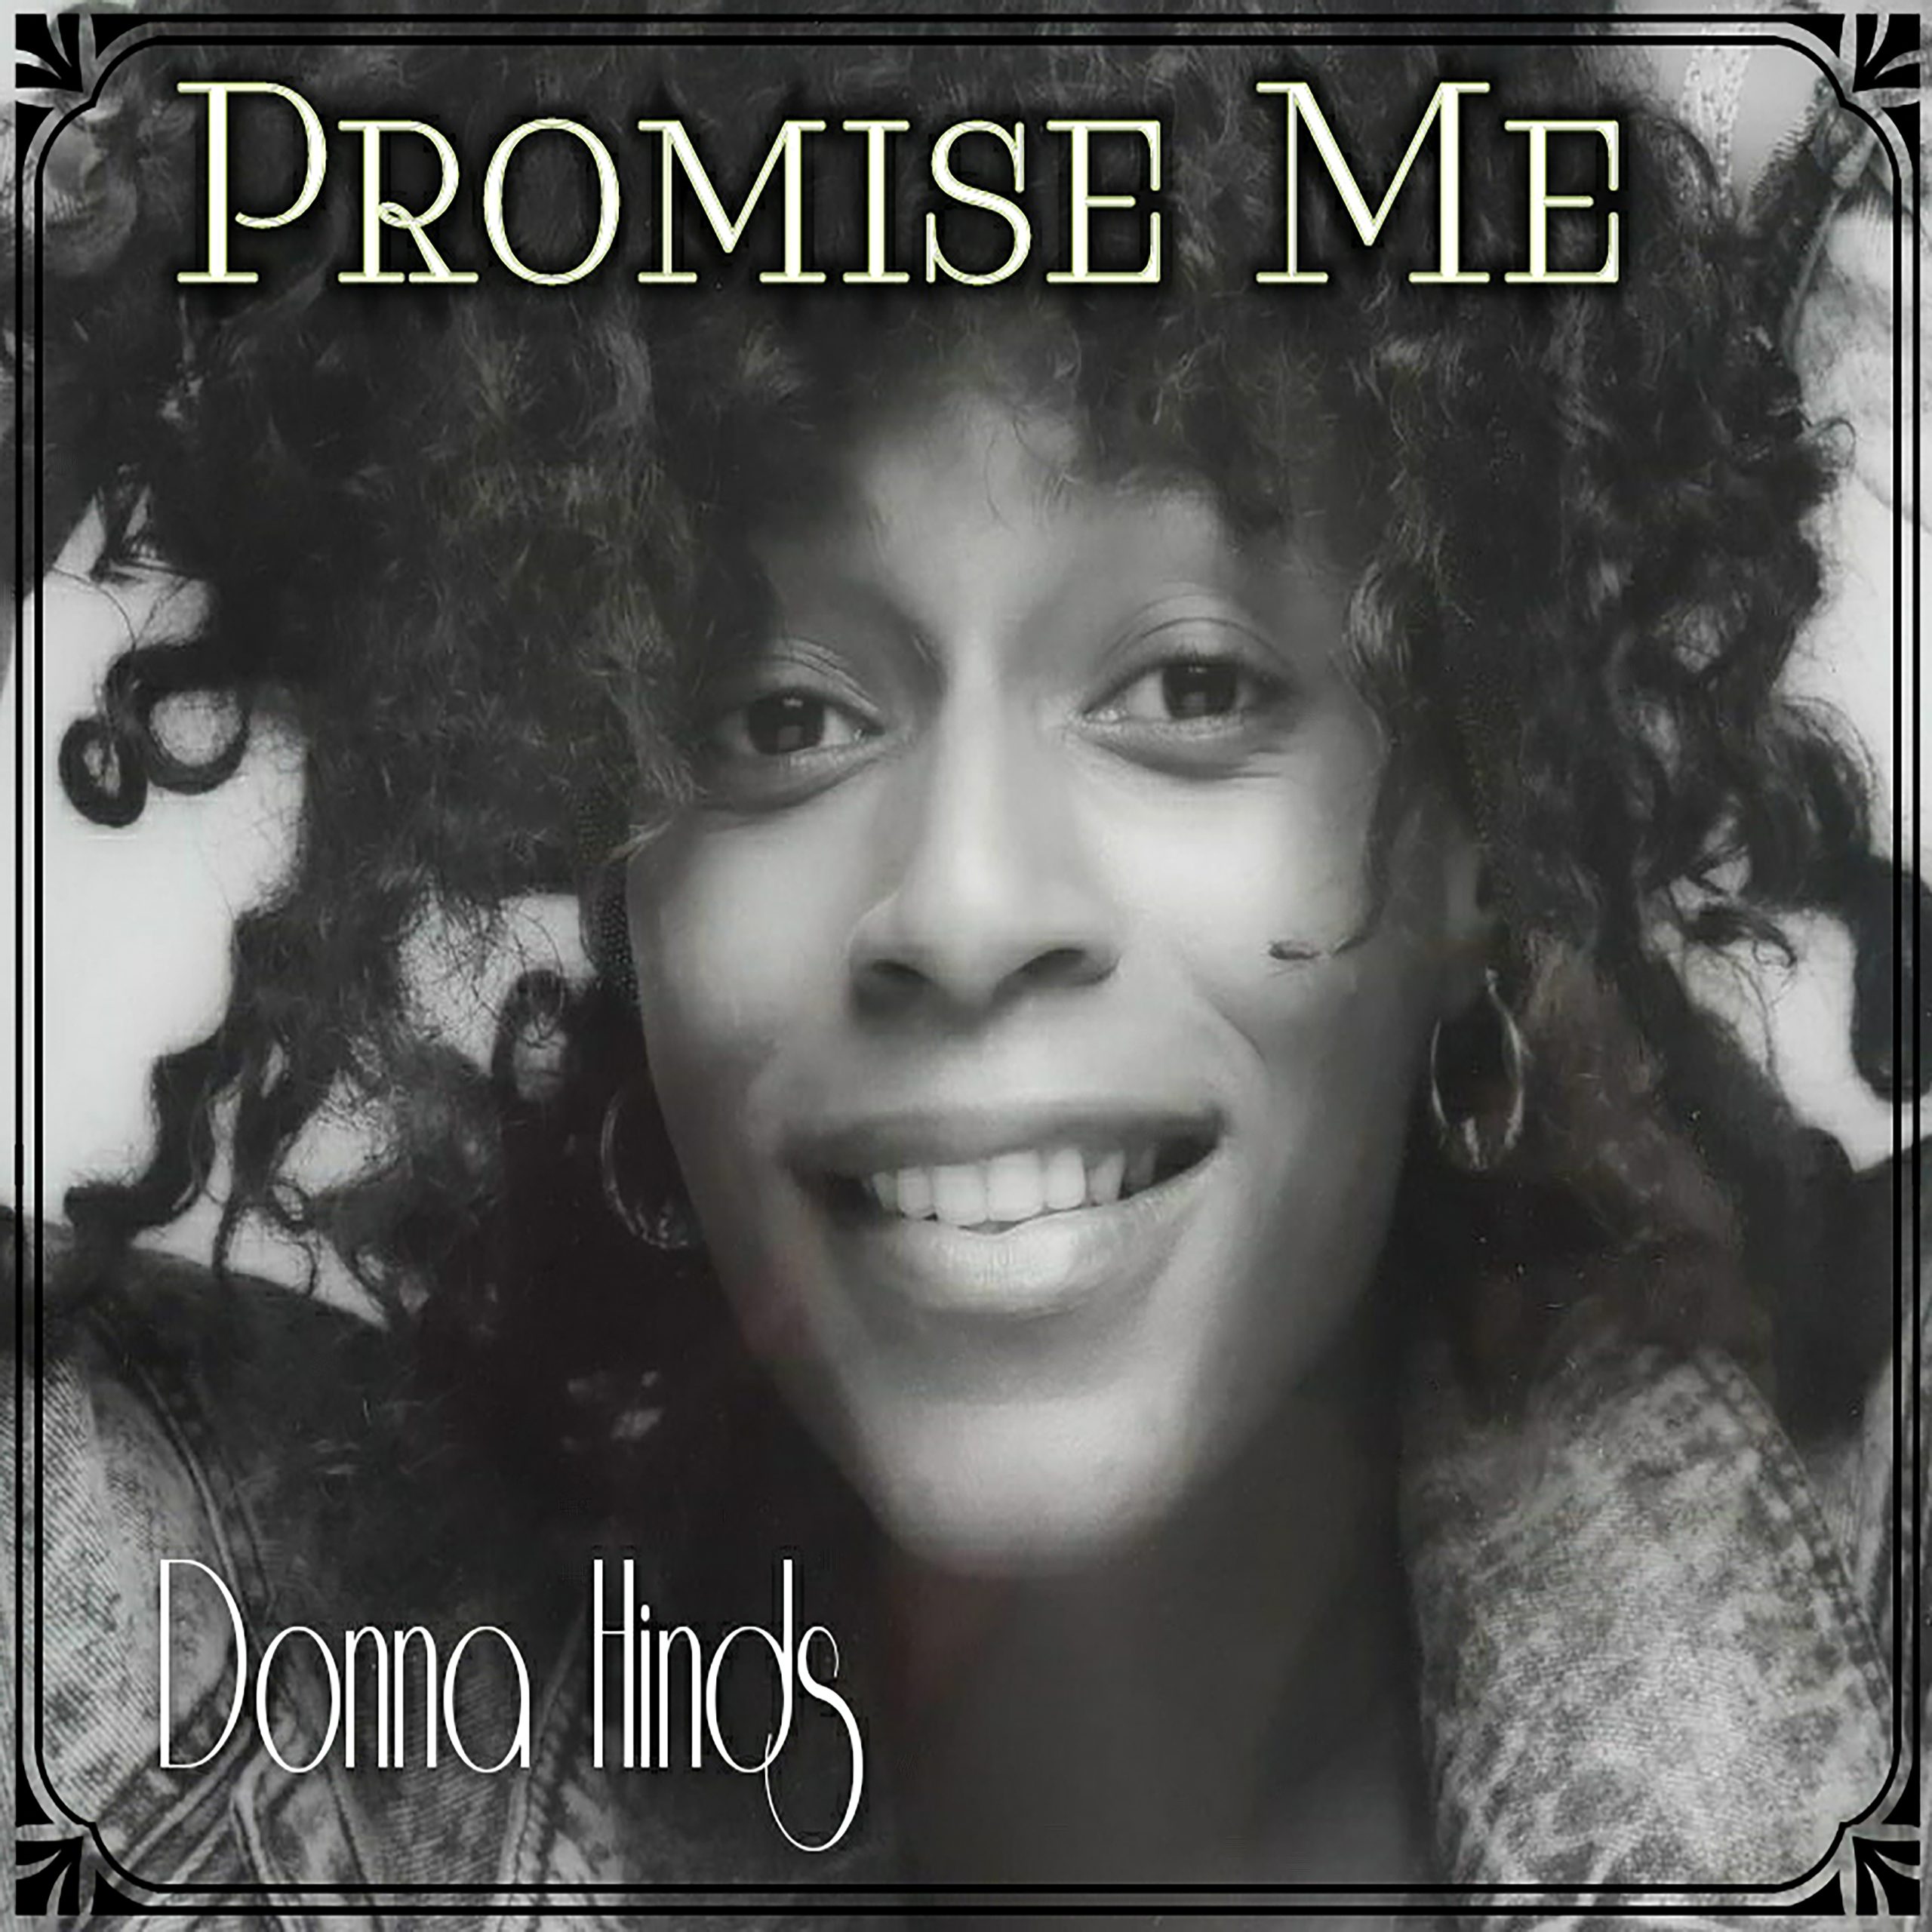 “Promise Me” by Donna Hinds, is available to download from All major download websites, and Kufe records.